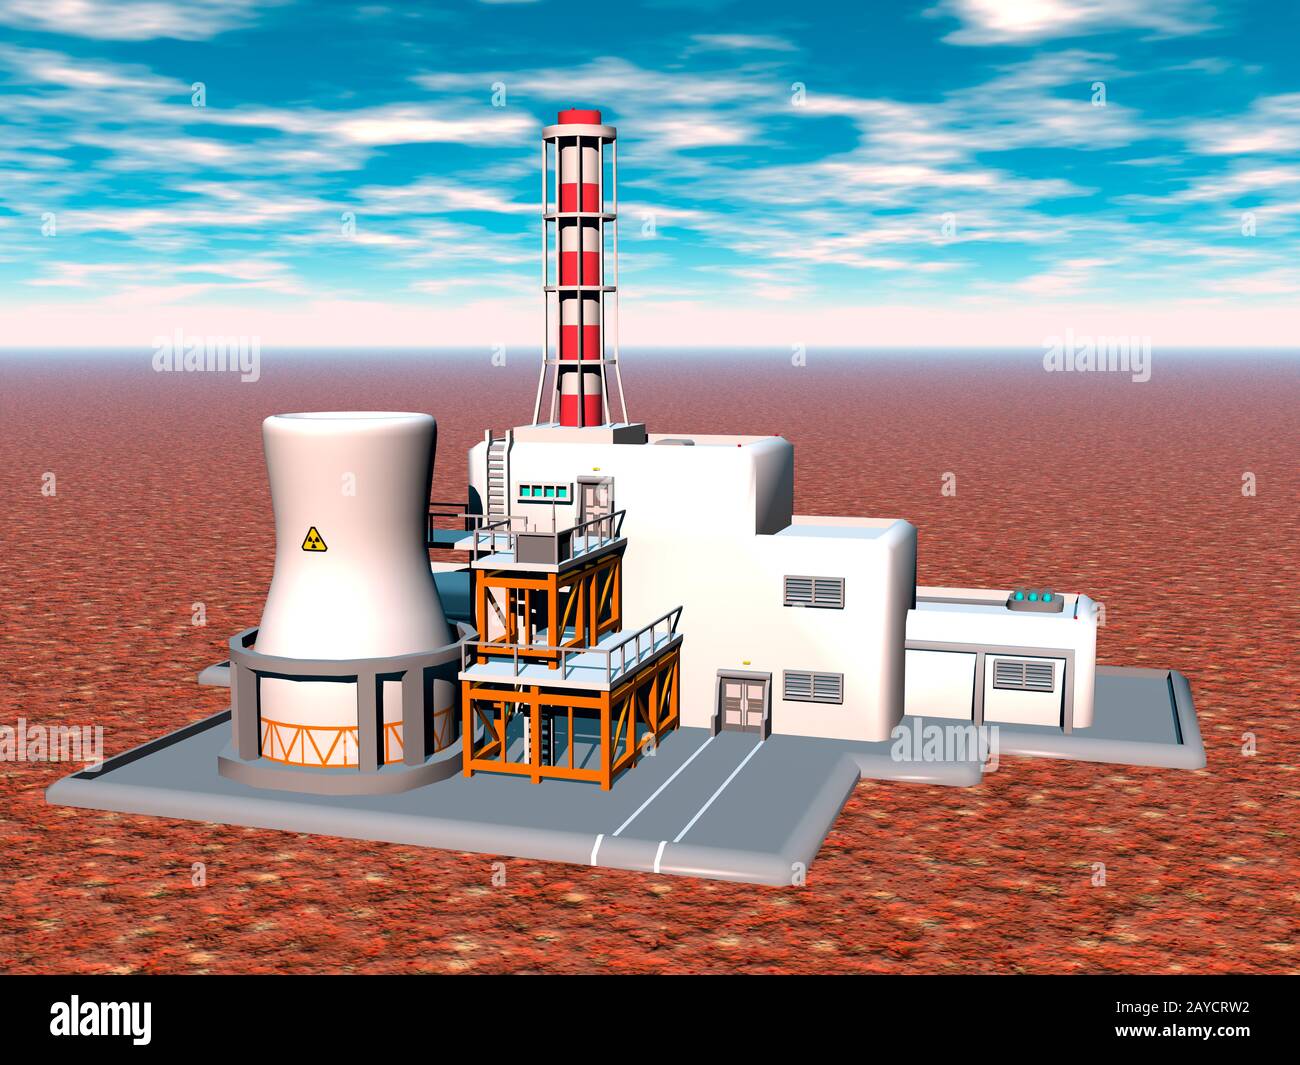 Nuclear power plant with cooling tower for energy supply Stock Photo